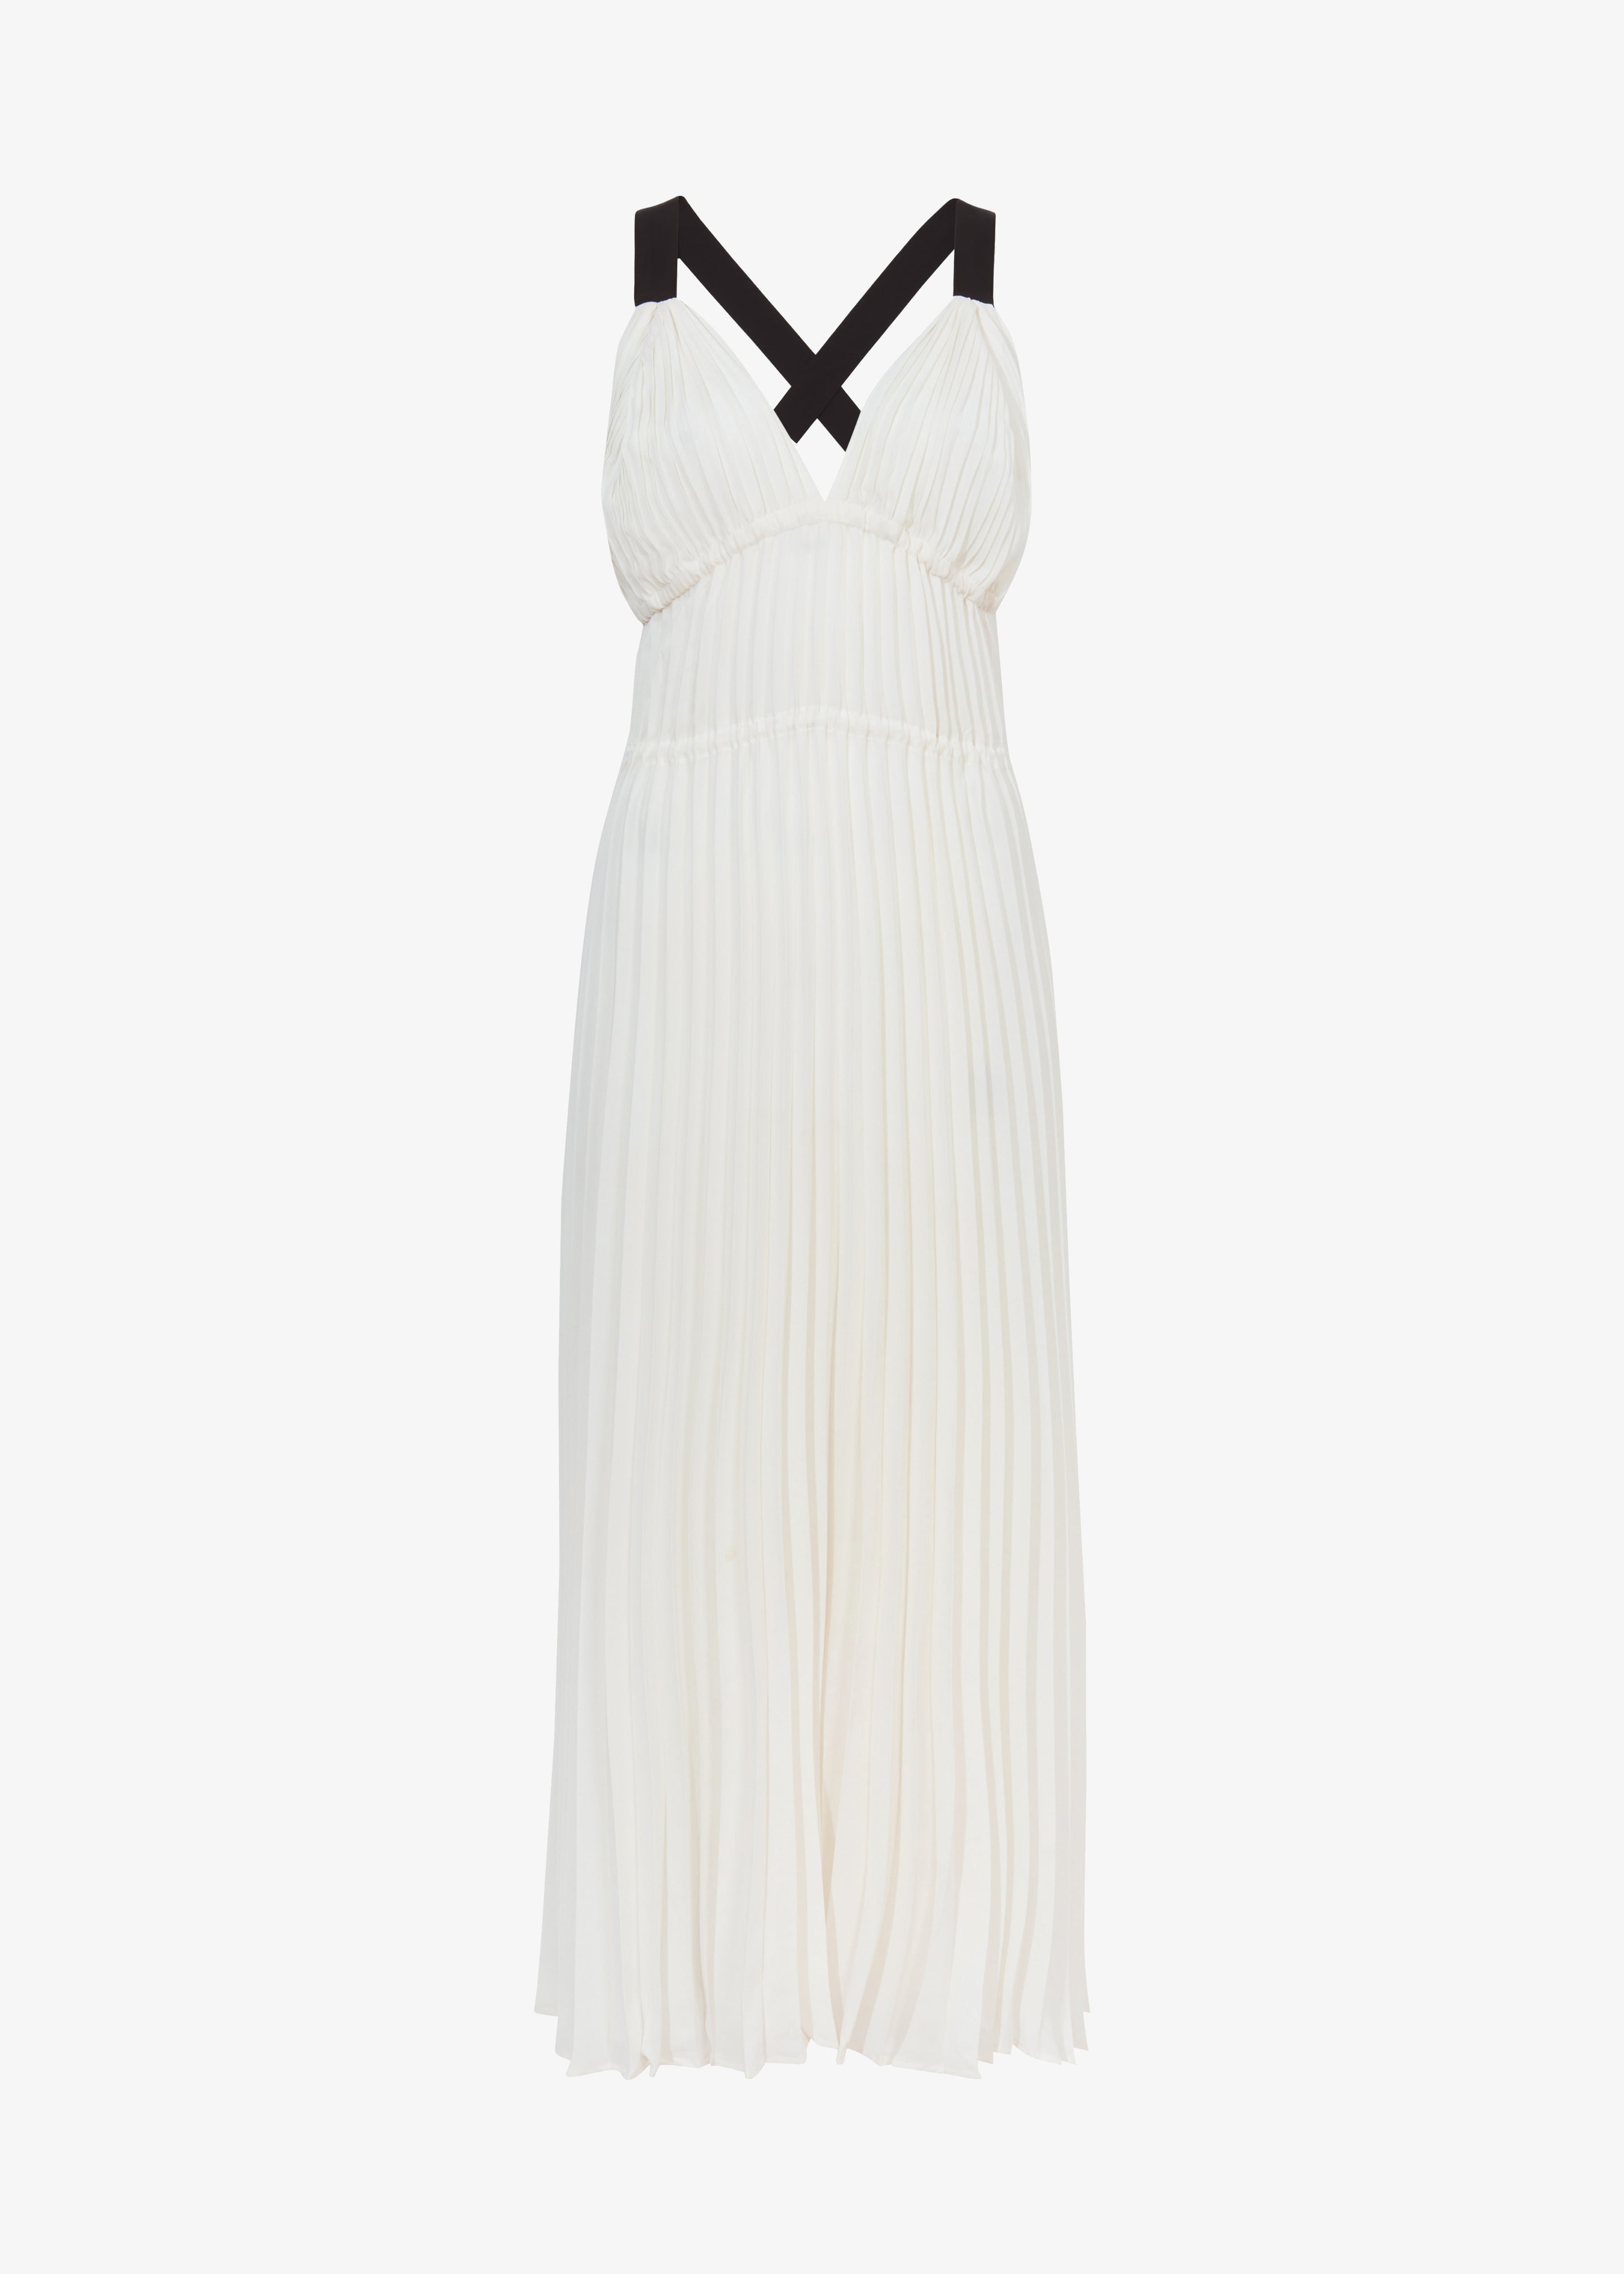 Proenza Schouler White Label Broomstick Pleated Tank Dress - Off White - 6